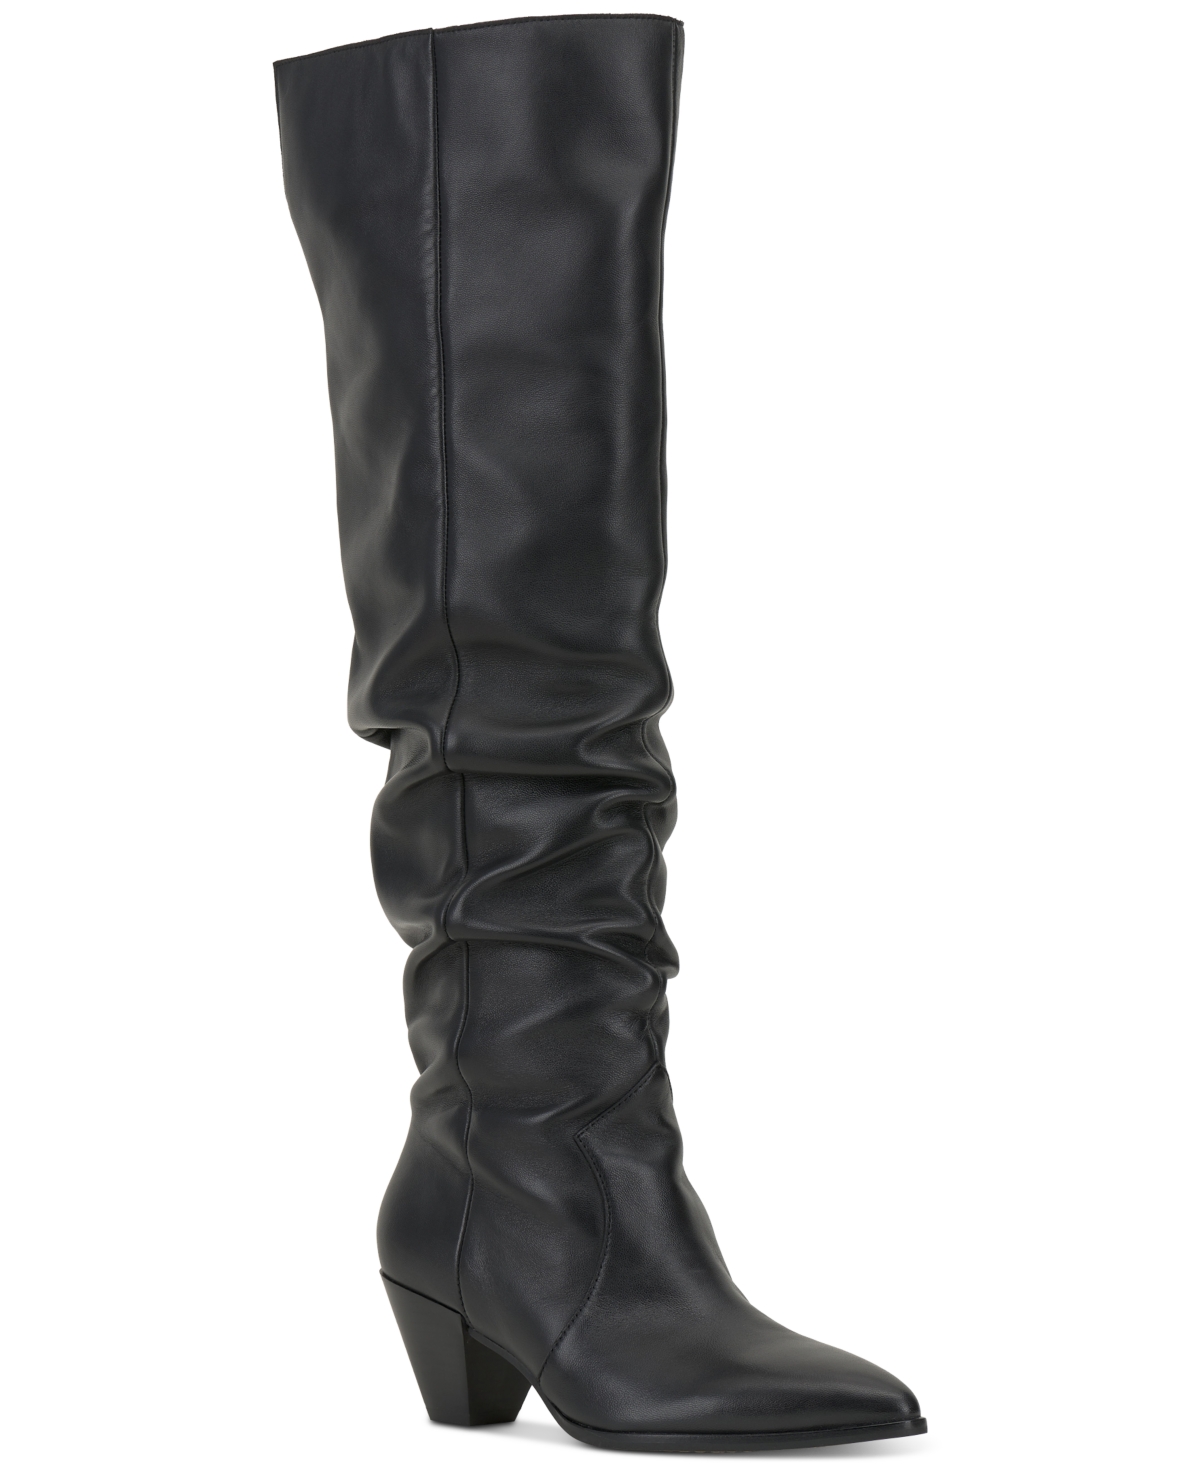 VINCE CAMUTO WOMEN'S SEWINNY SLOUCH KNEE-HIGH DRESS BOOTS